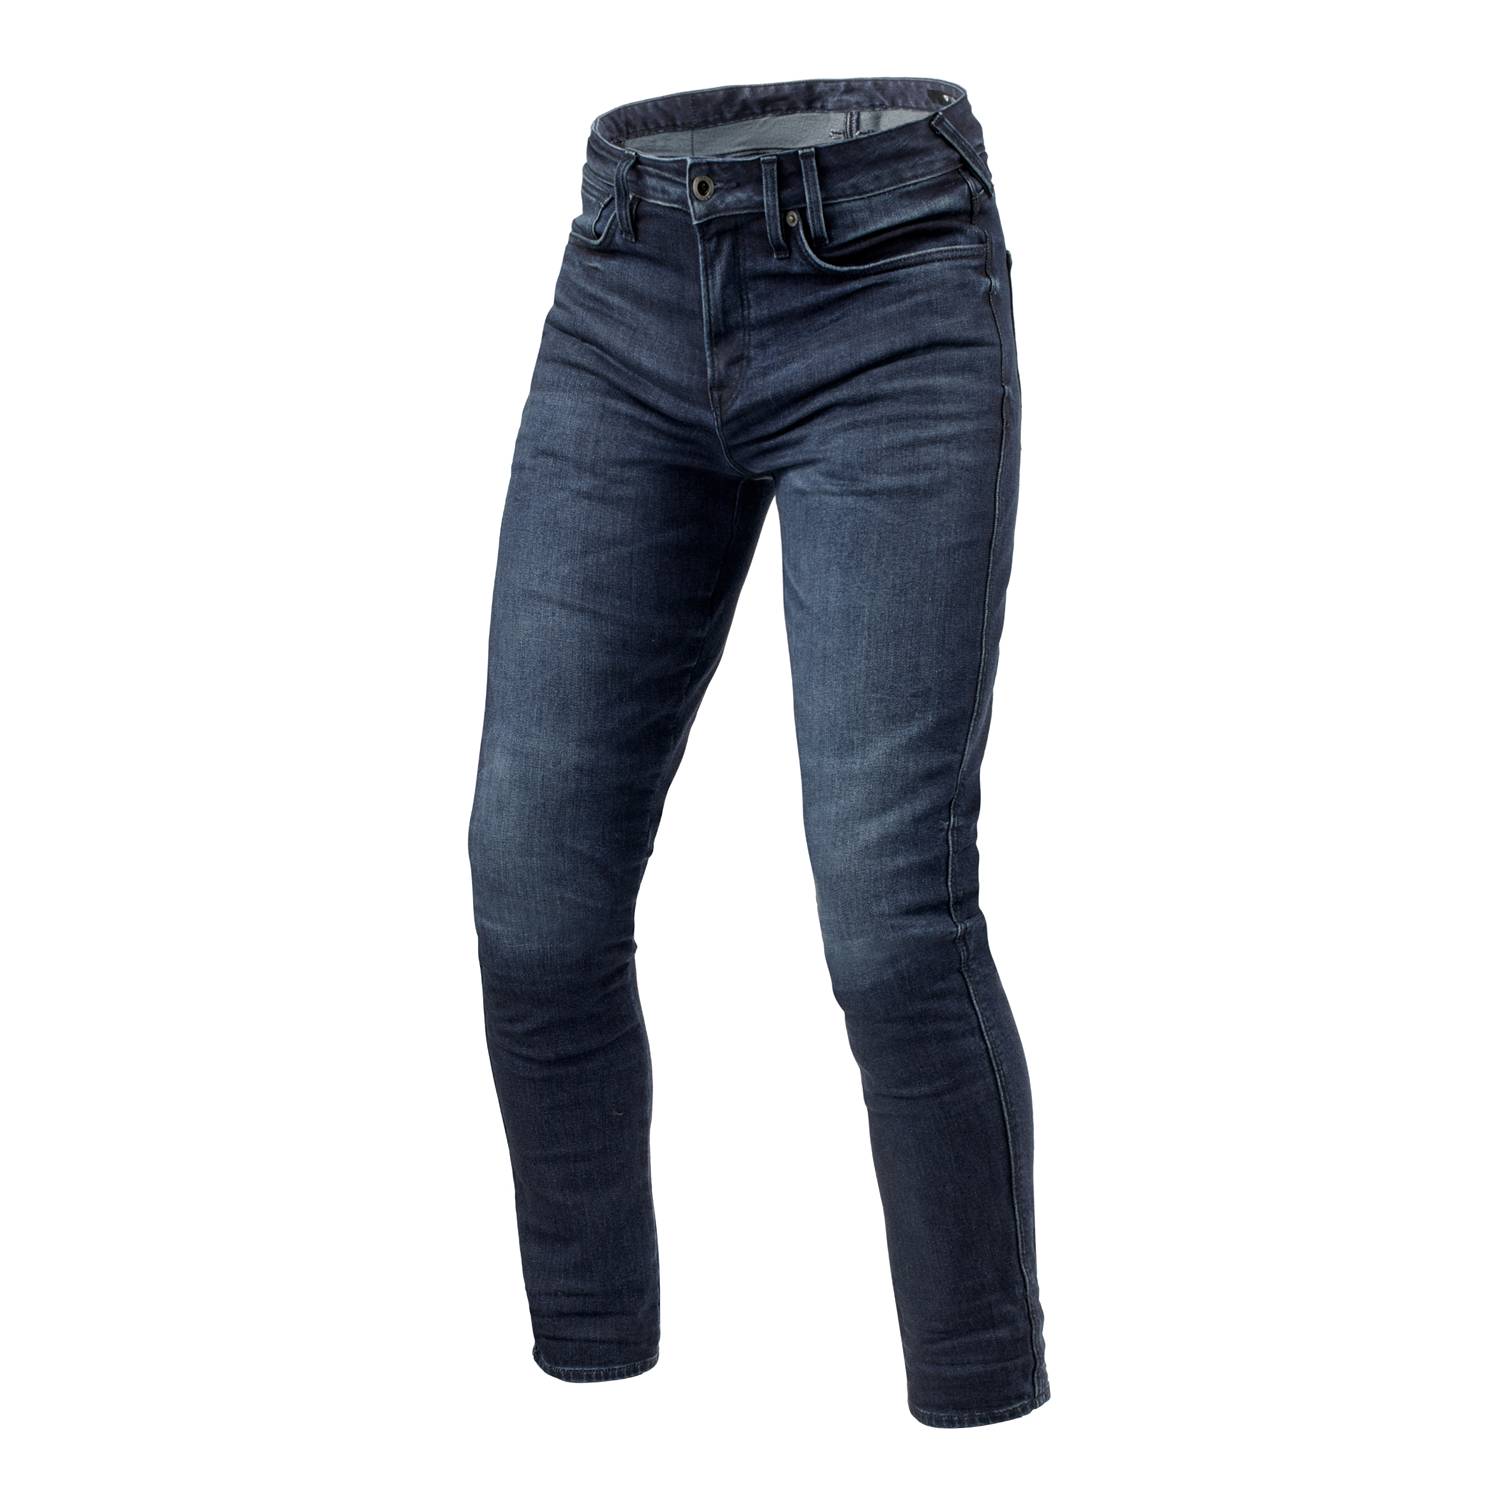 Image of REV'IT! Jeans Carlin SK Dark Blue Used L34 Motorcycle Jeans Taille L34/W33